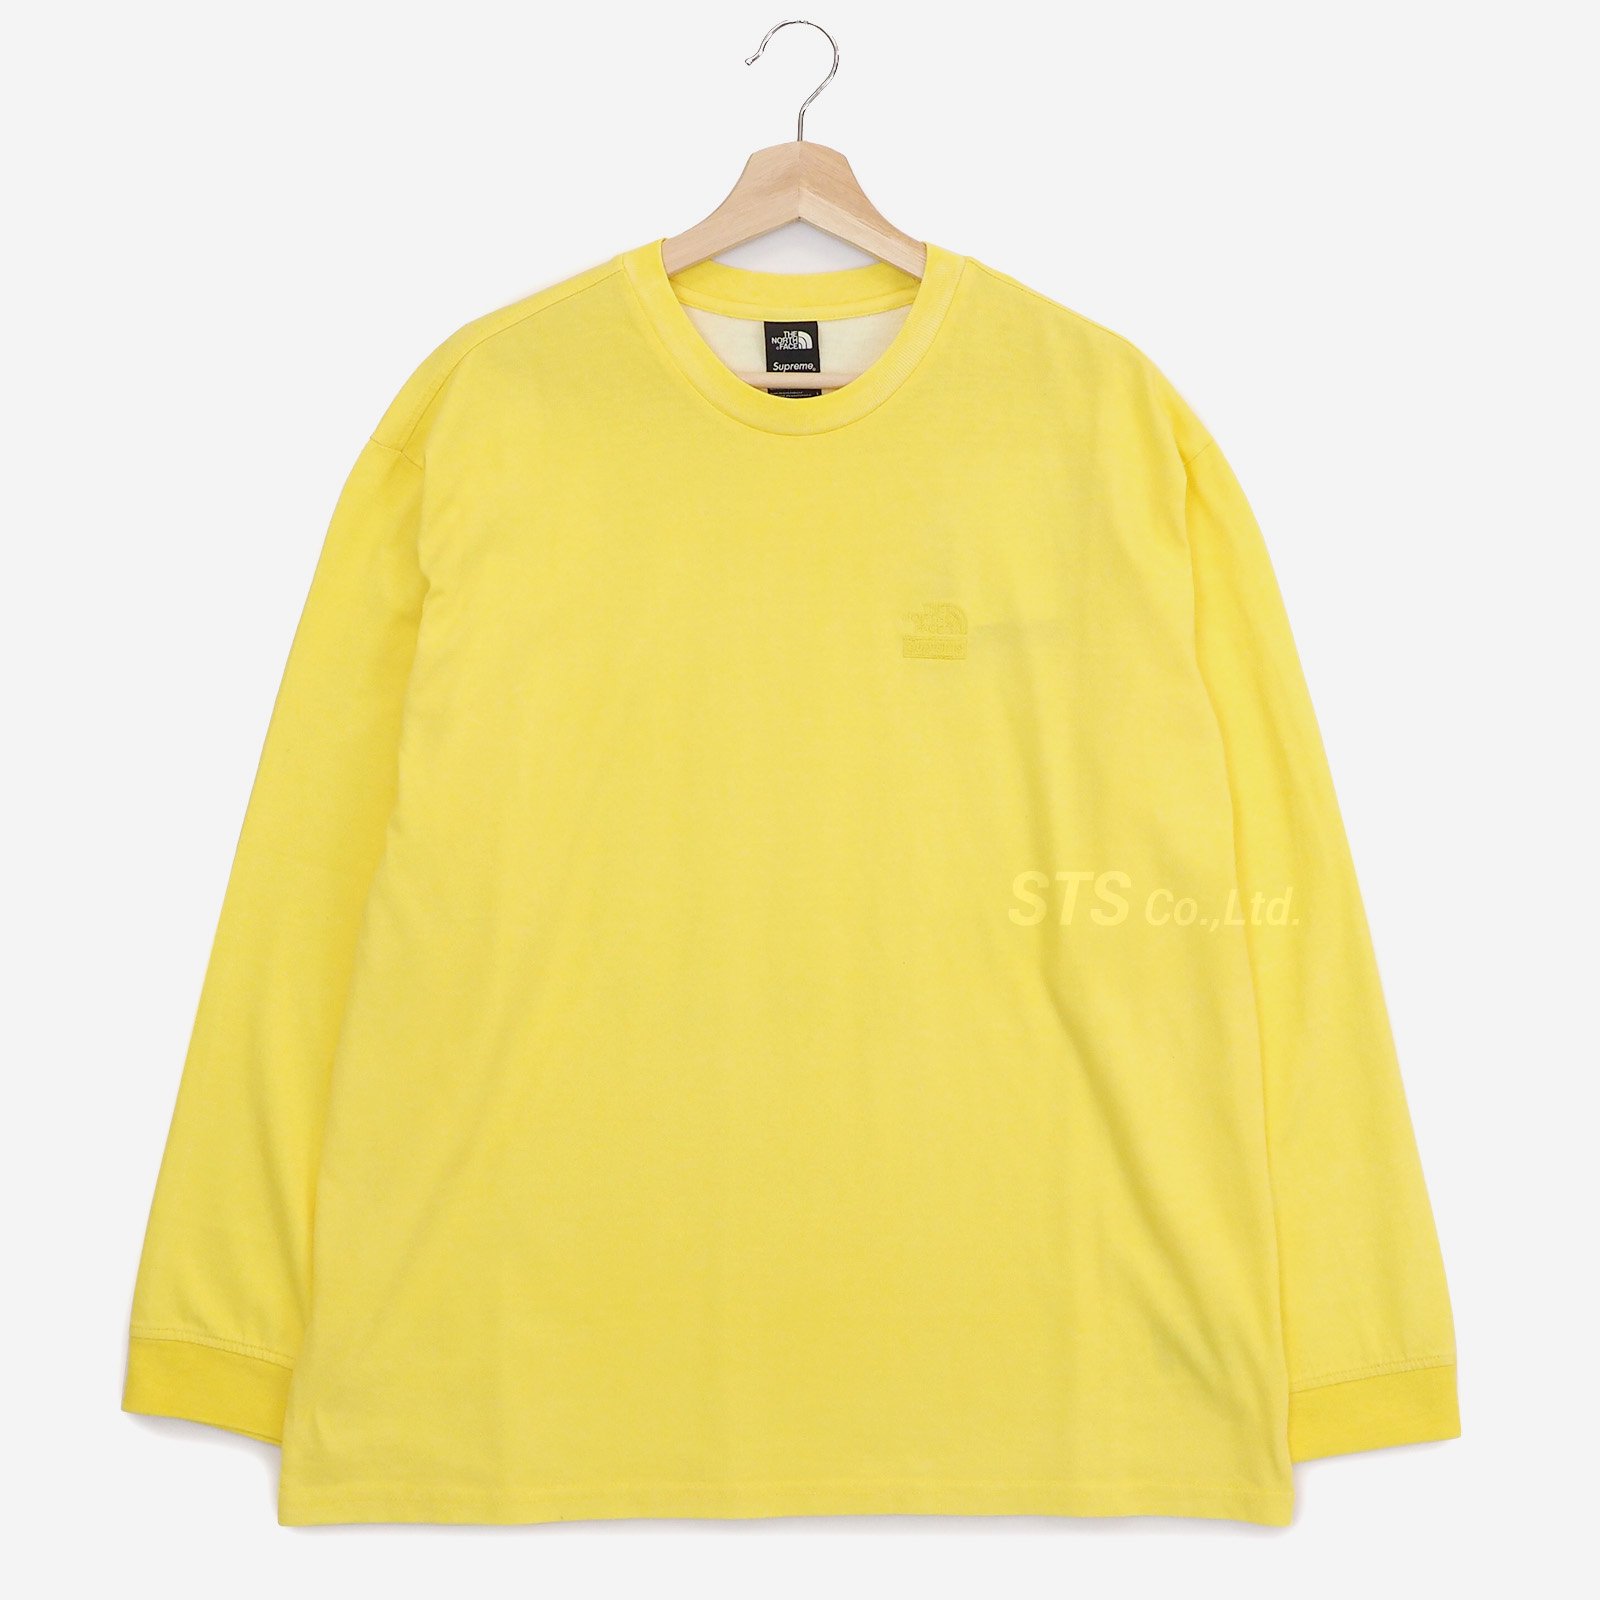 Supreme/The North Face Pigment Printed L/S Top - ParkSIDER